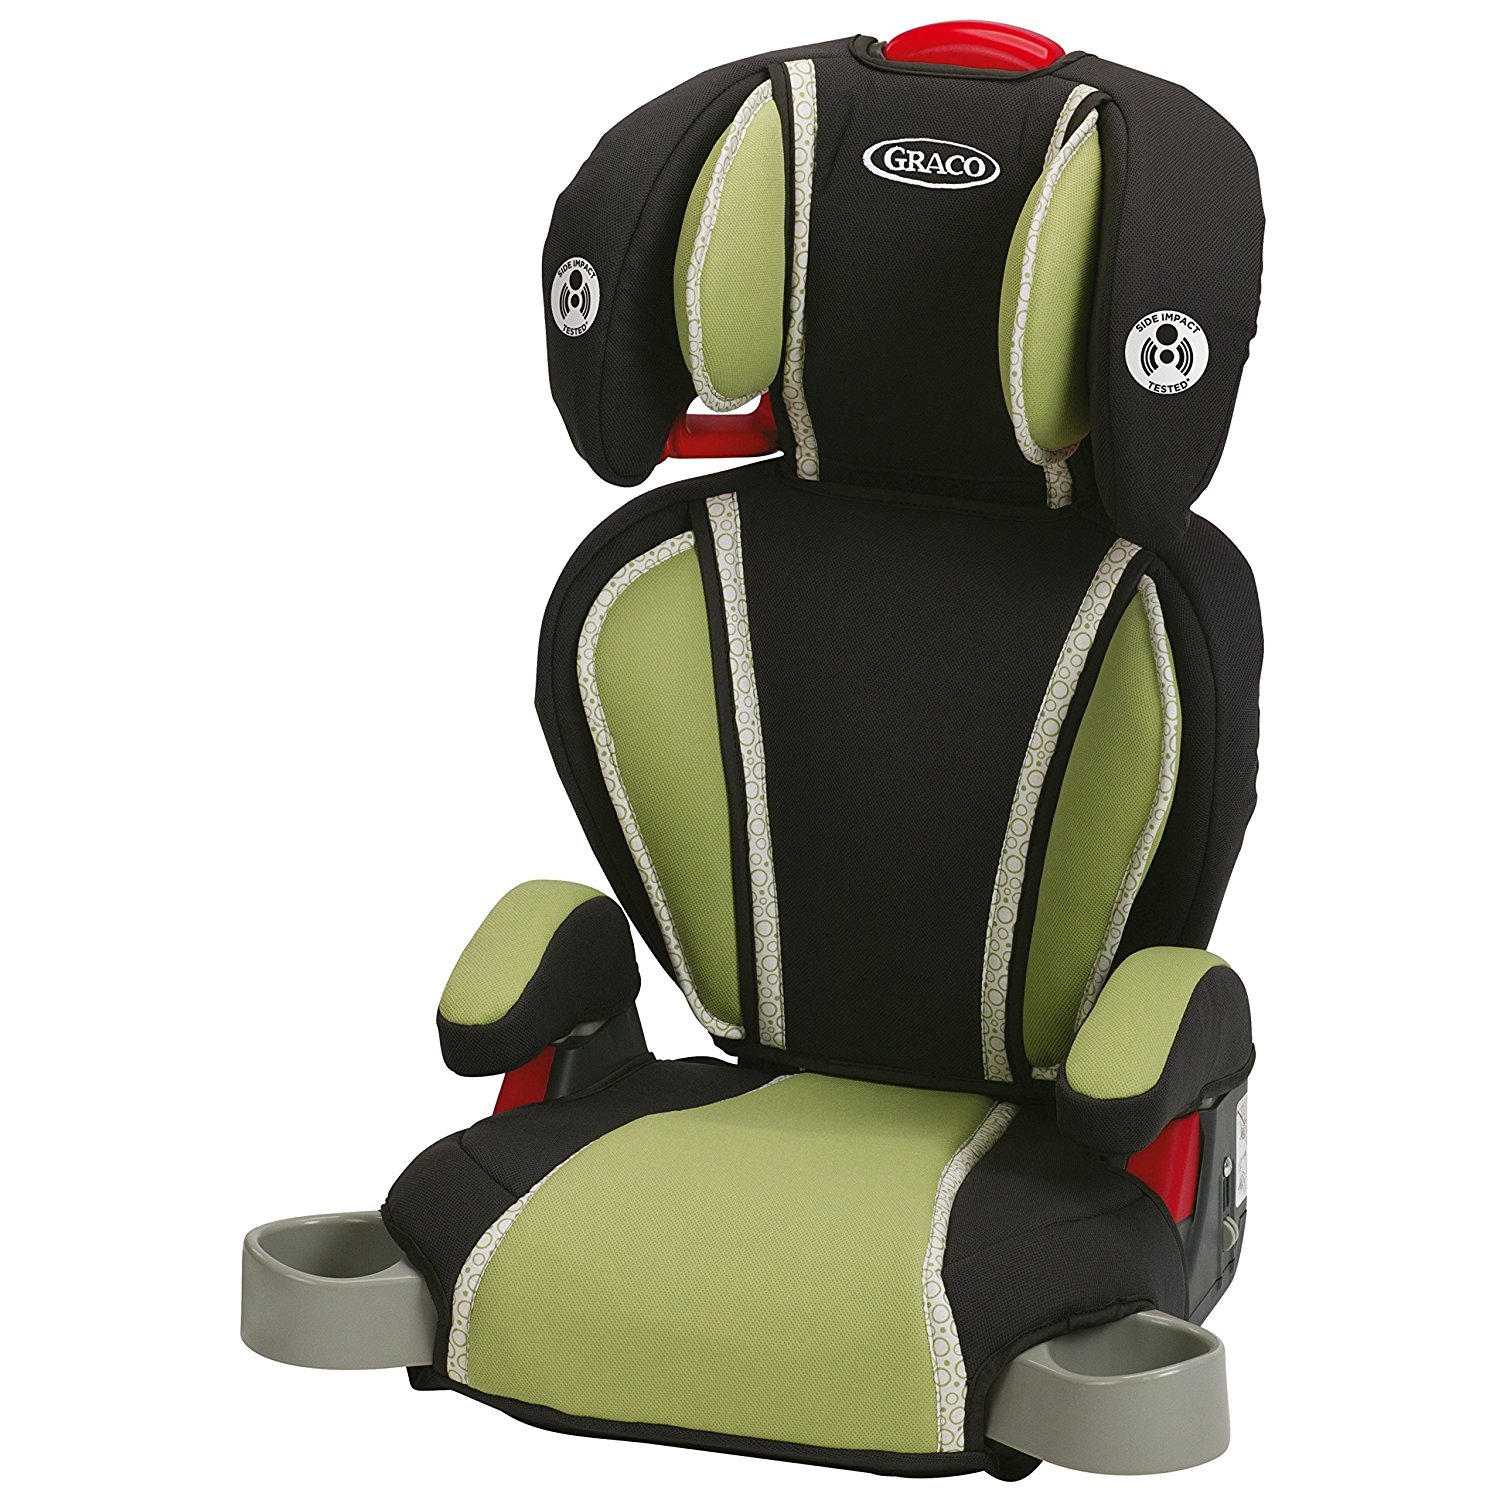 Top 10 Best High Back Booster Seats for Cars | Heavy.com